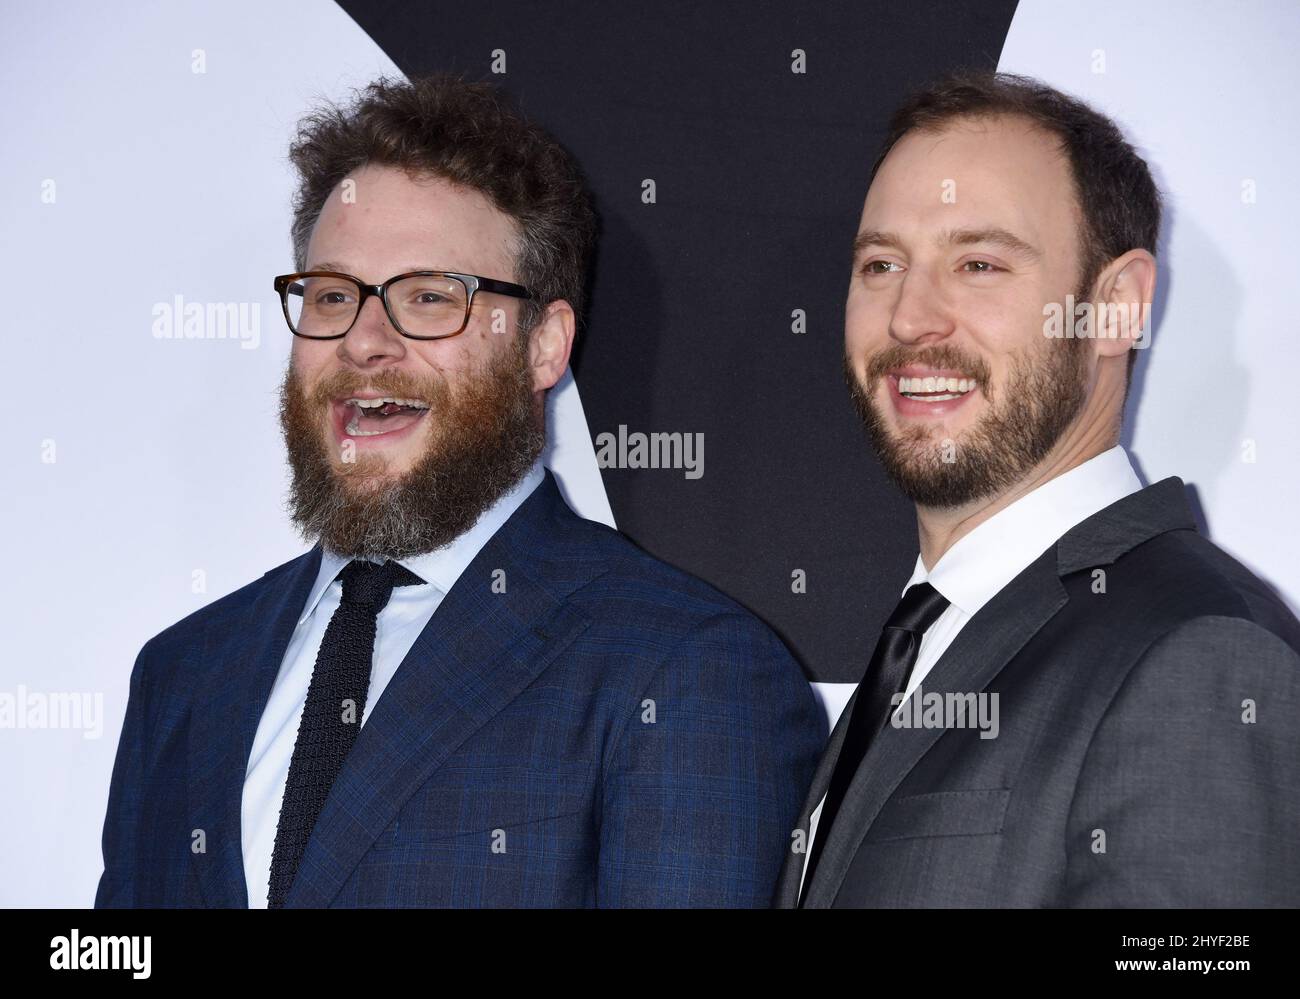 Seth Rogen and Evan Goldberg at Universal Pictures 'Blockers' Los Angeles Premiere held at the Regency Village Theatre on April 3, 2018 in Westwood Stock Photo